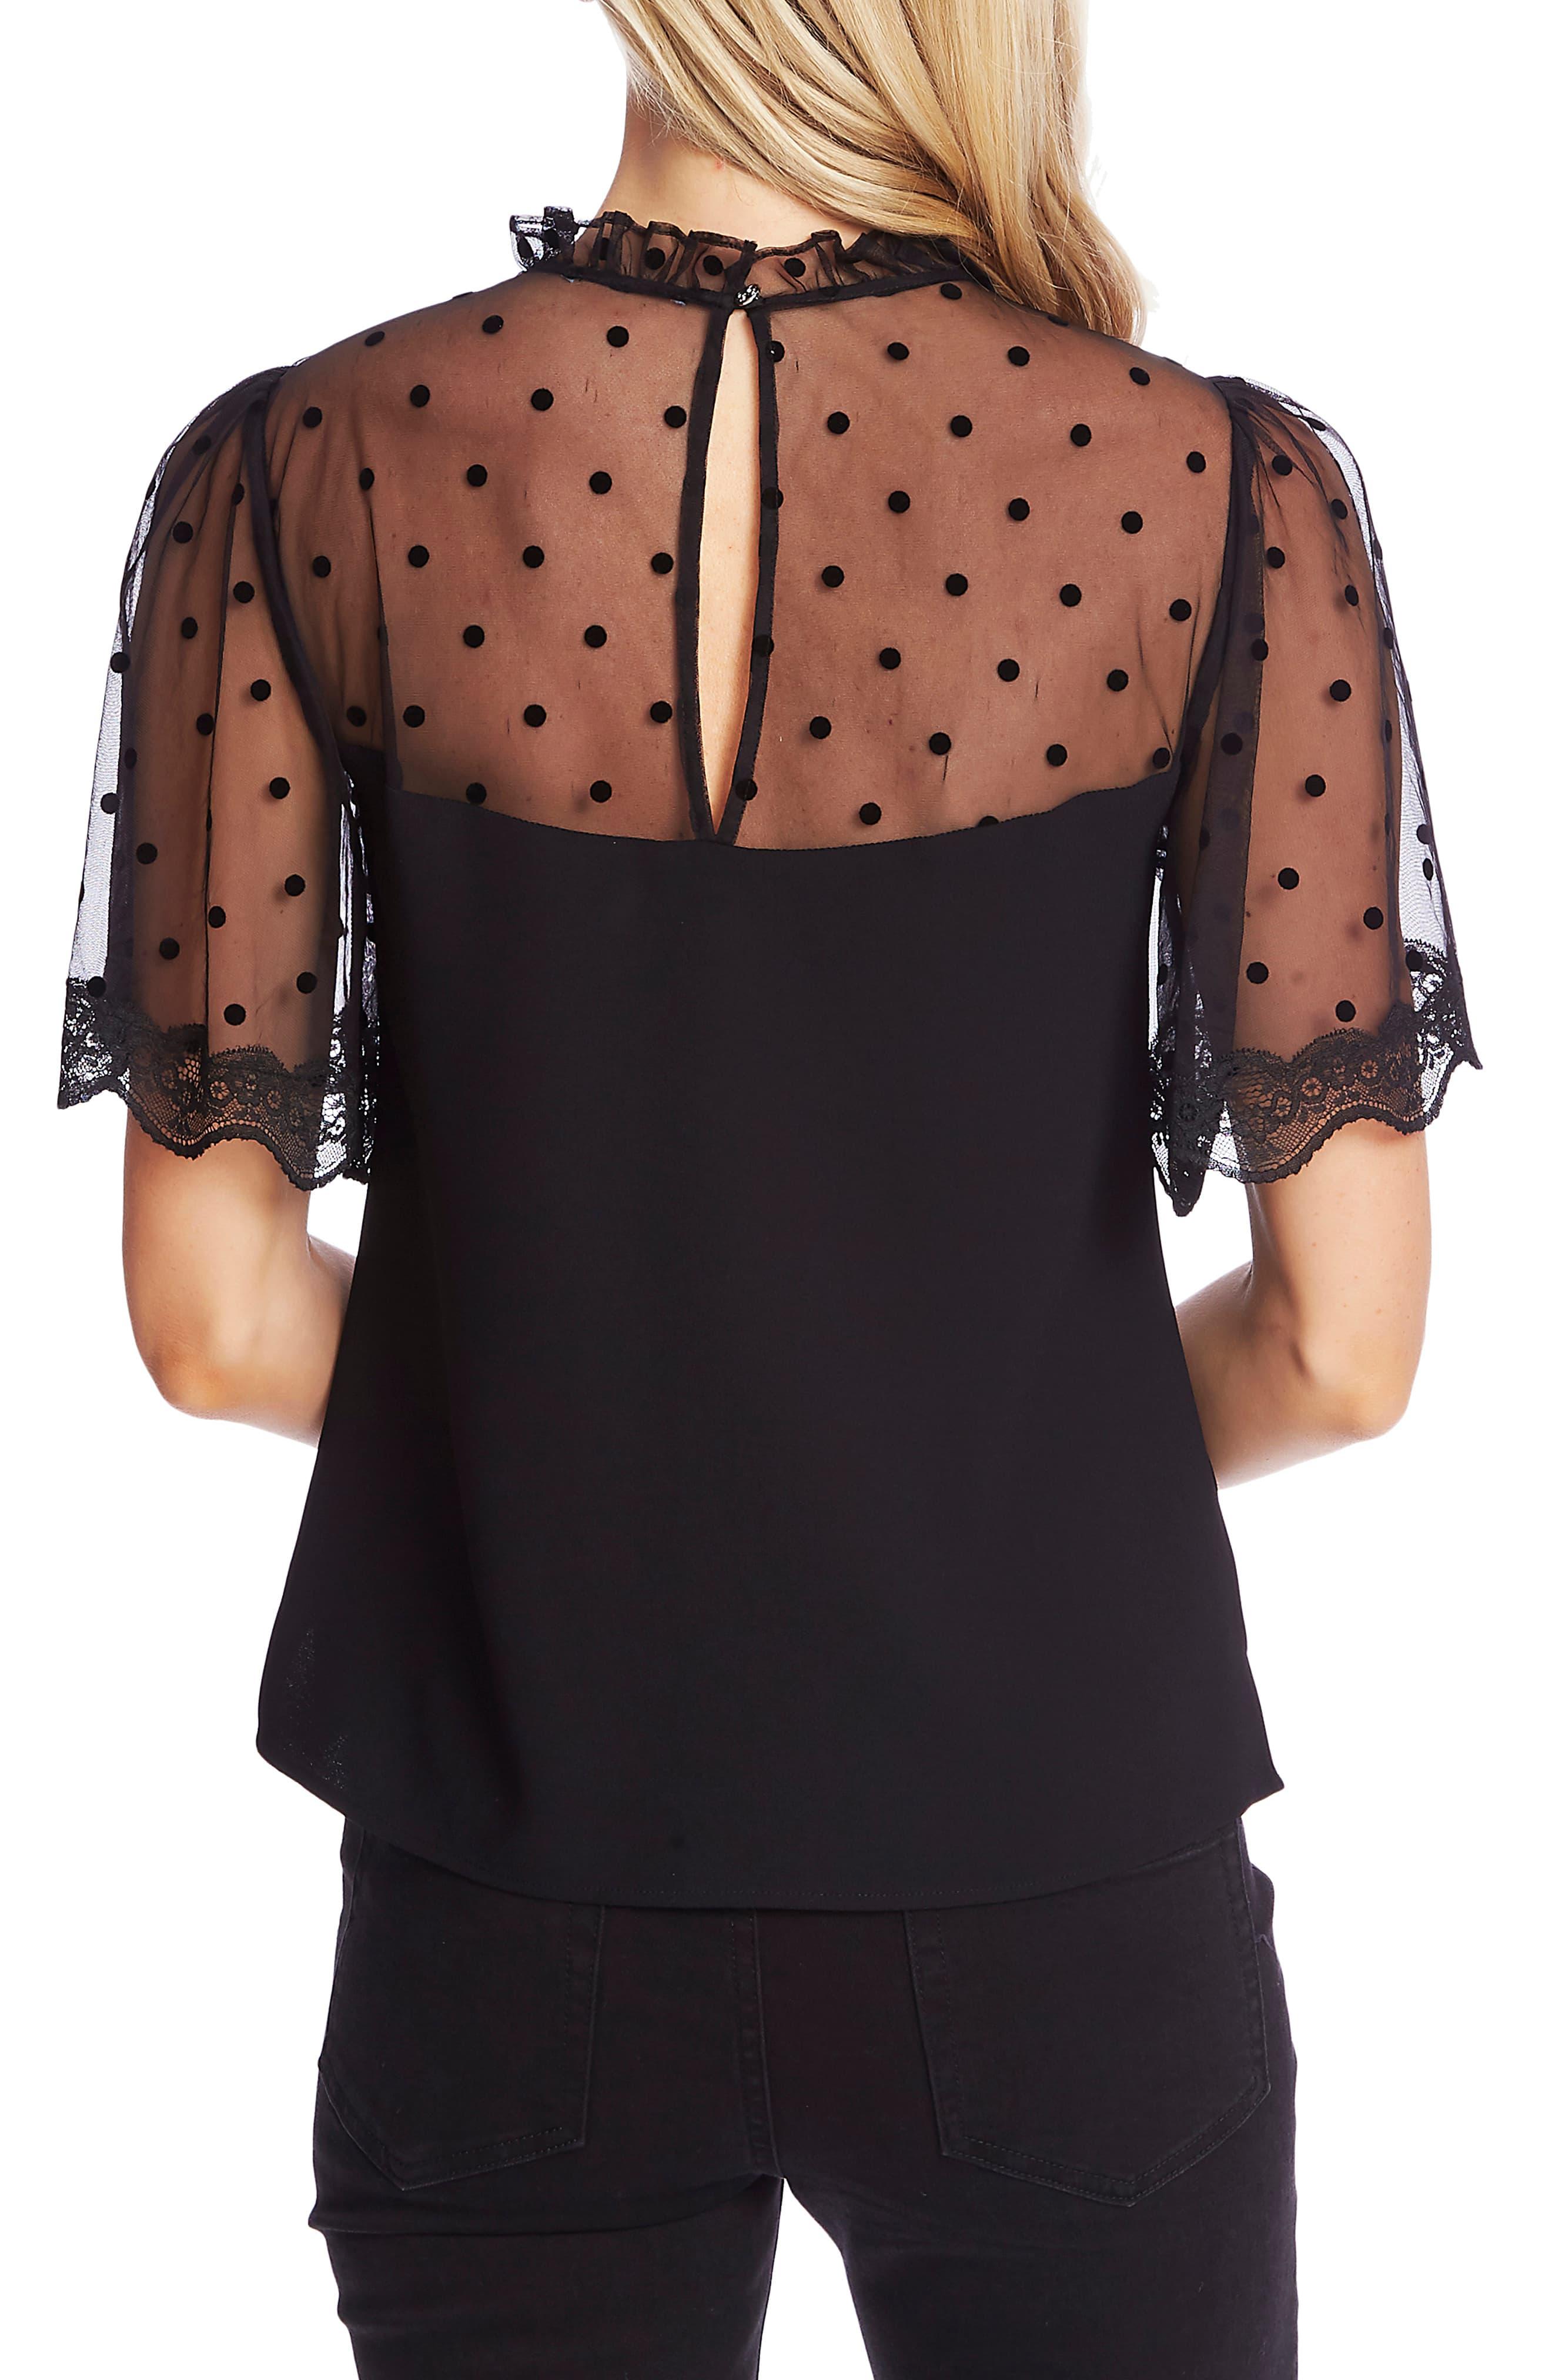 Cece Mixed Media Flocked Dot & Lace Blouse in Black - Lyst